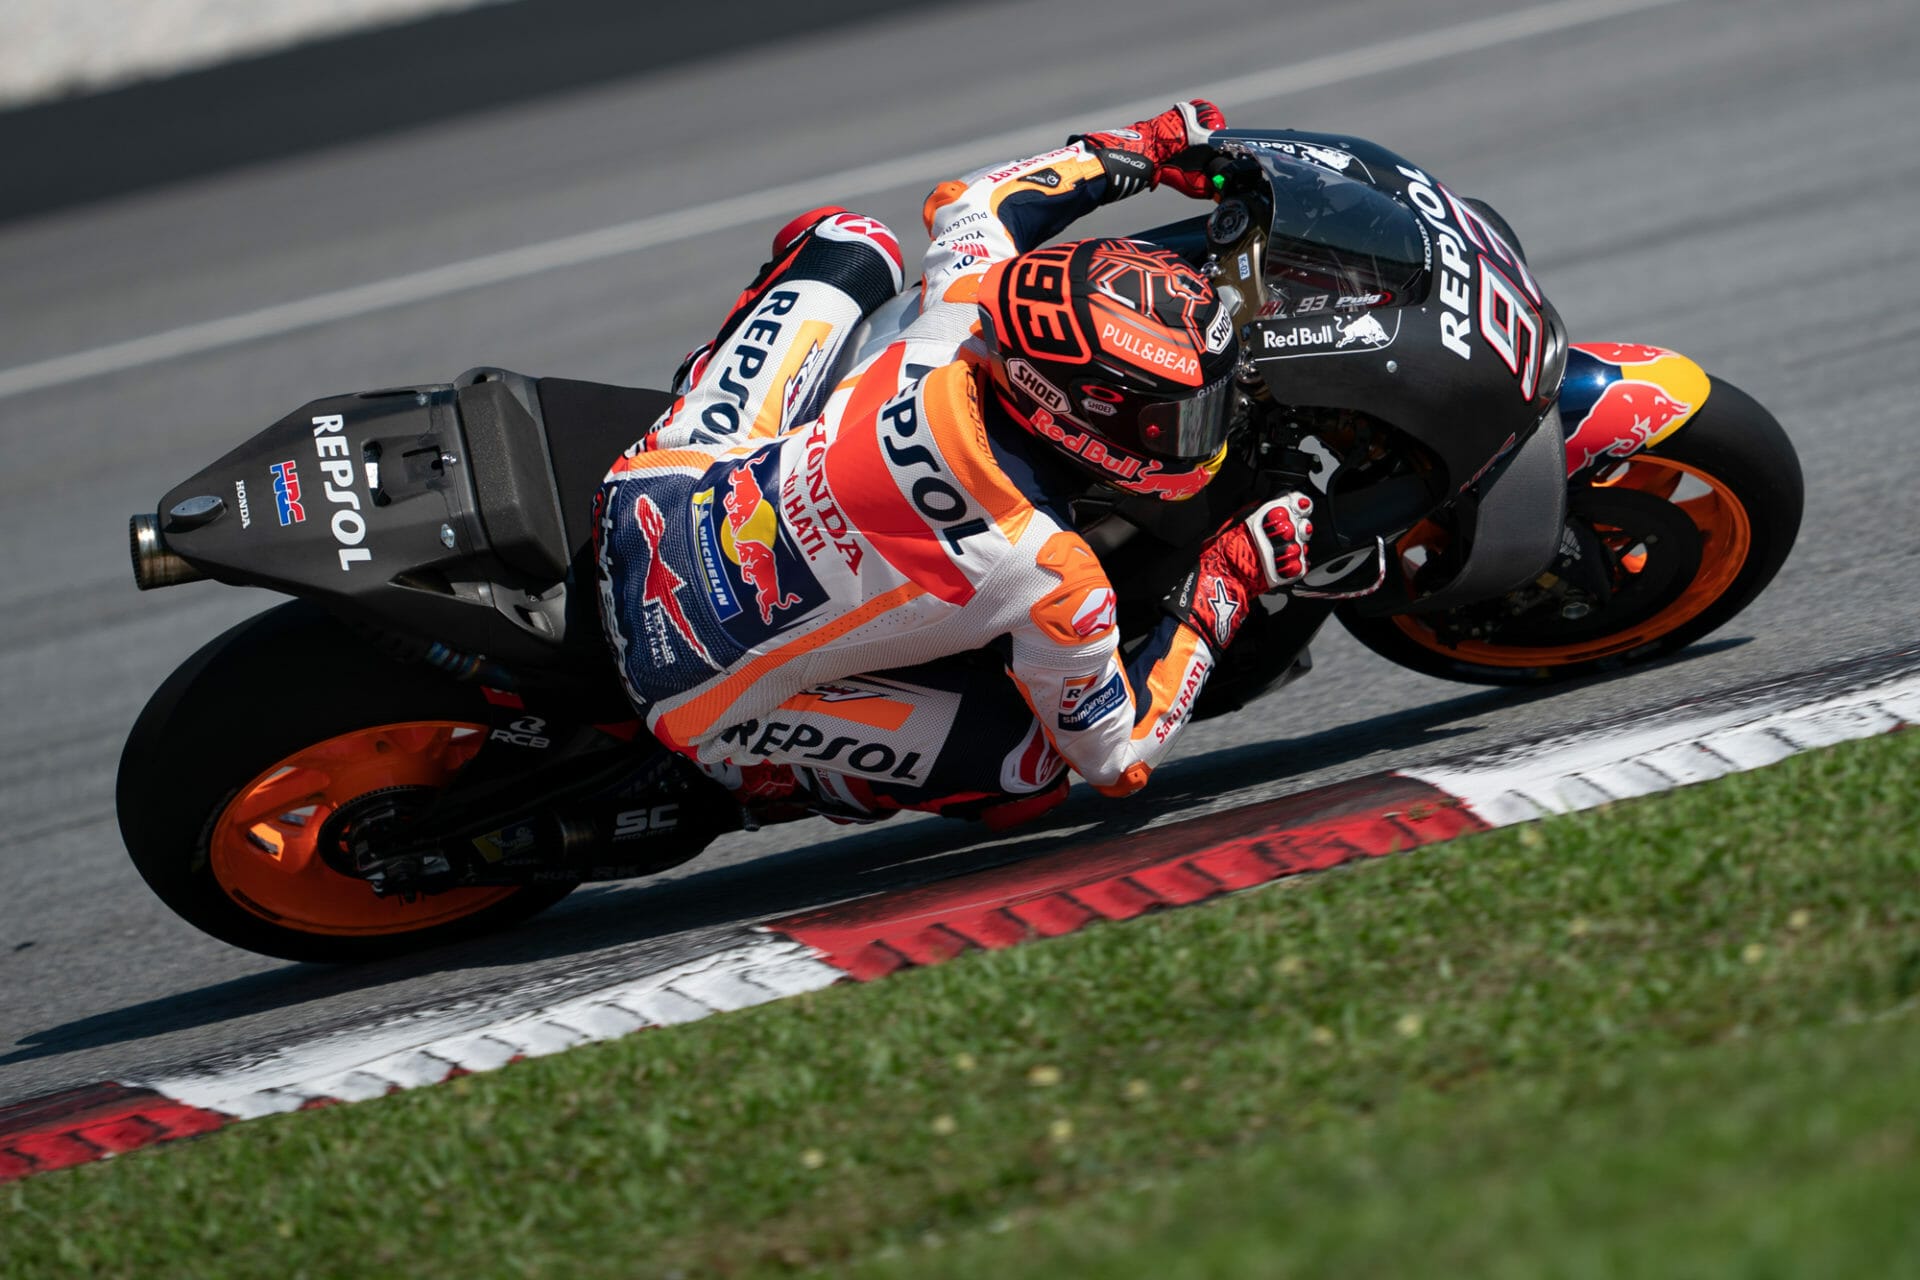 Marquez already back on the MotoGP rocket
- also in the MOTORCYCLES.NEWS APP